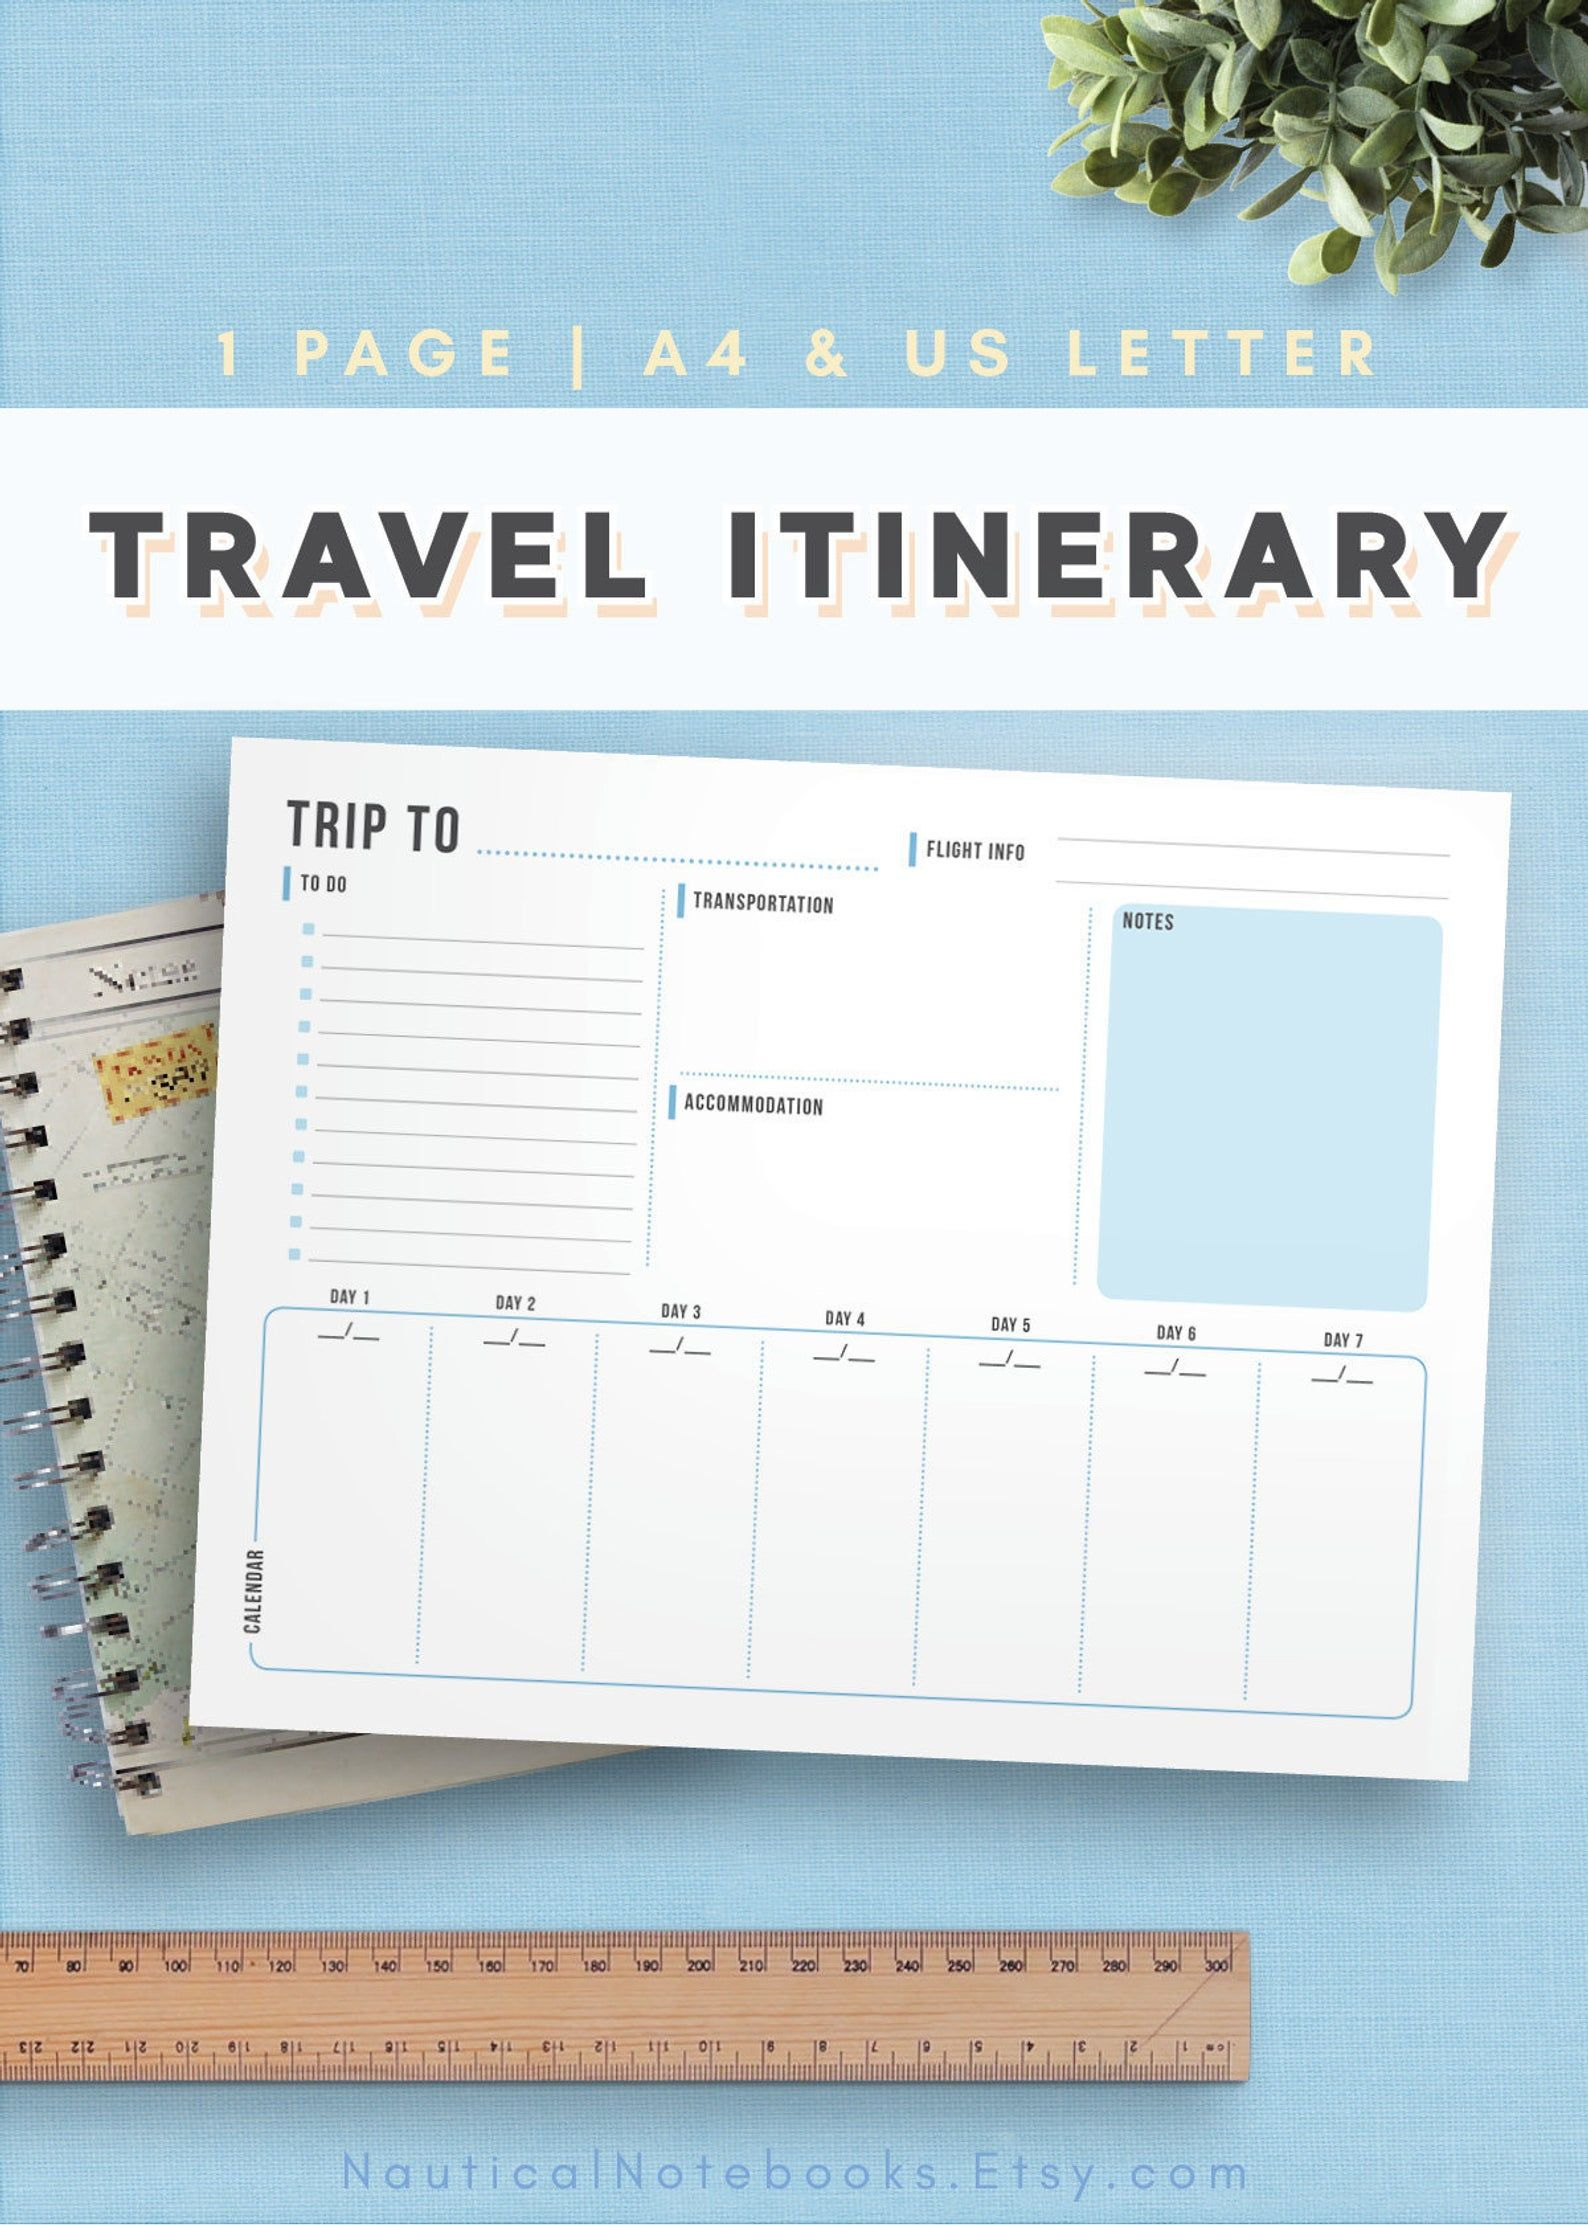 Travel Itinerary Template Printable Vacation Trip Planner in Vacation Itinerary Planner Template